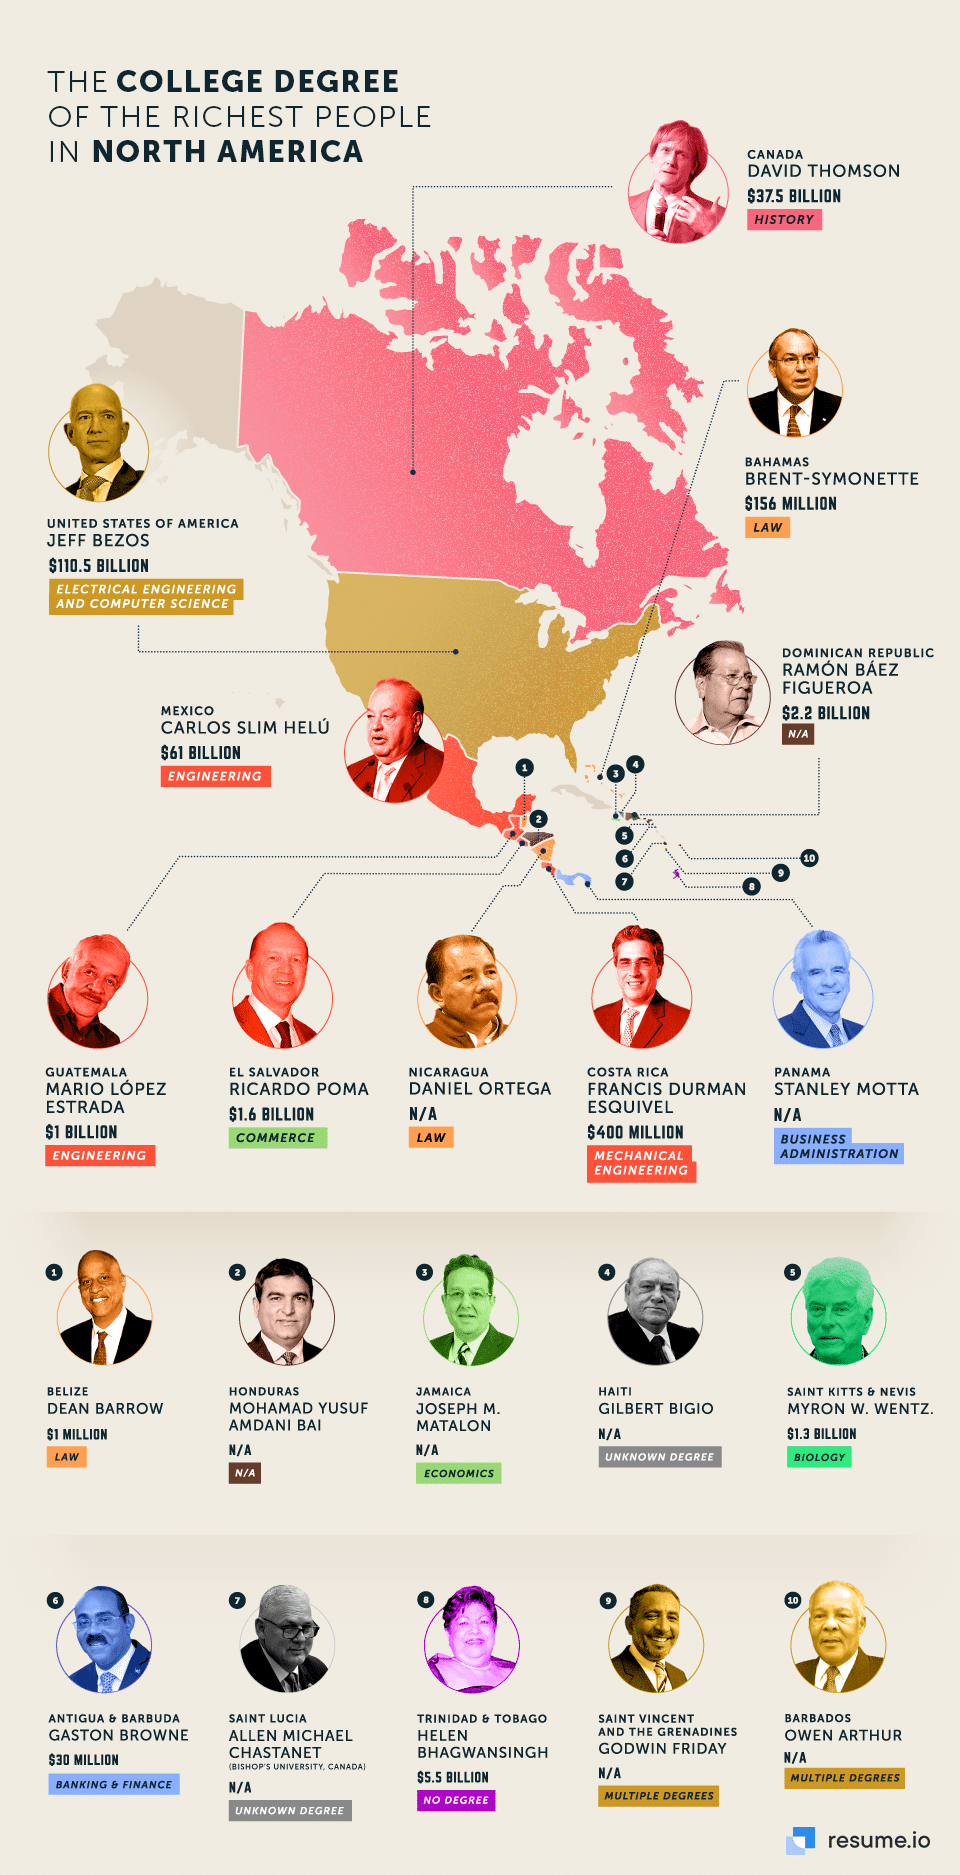 Degrees of Each Country's Richest Person